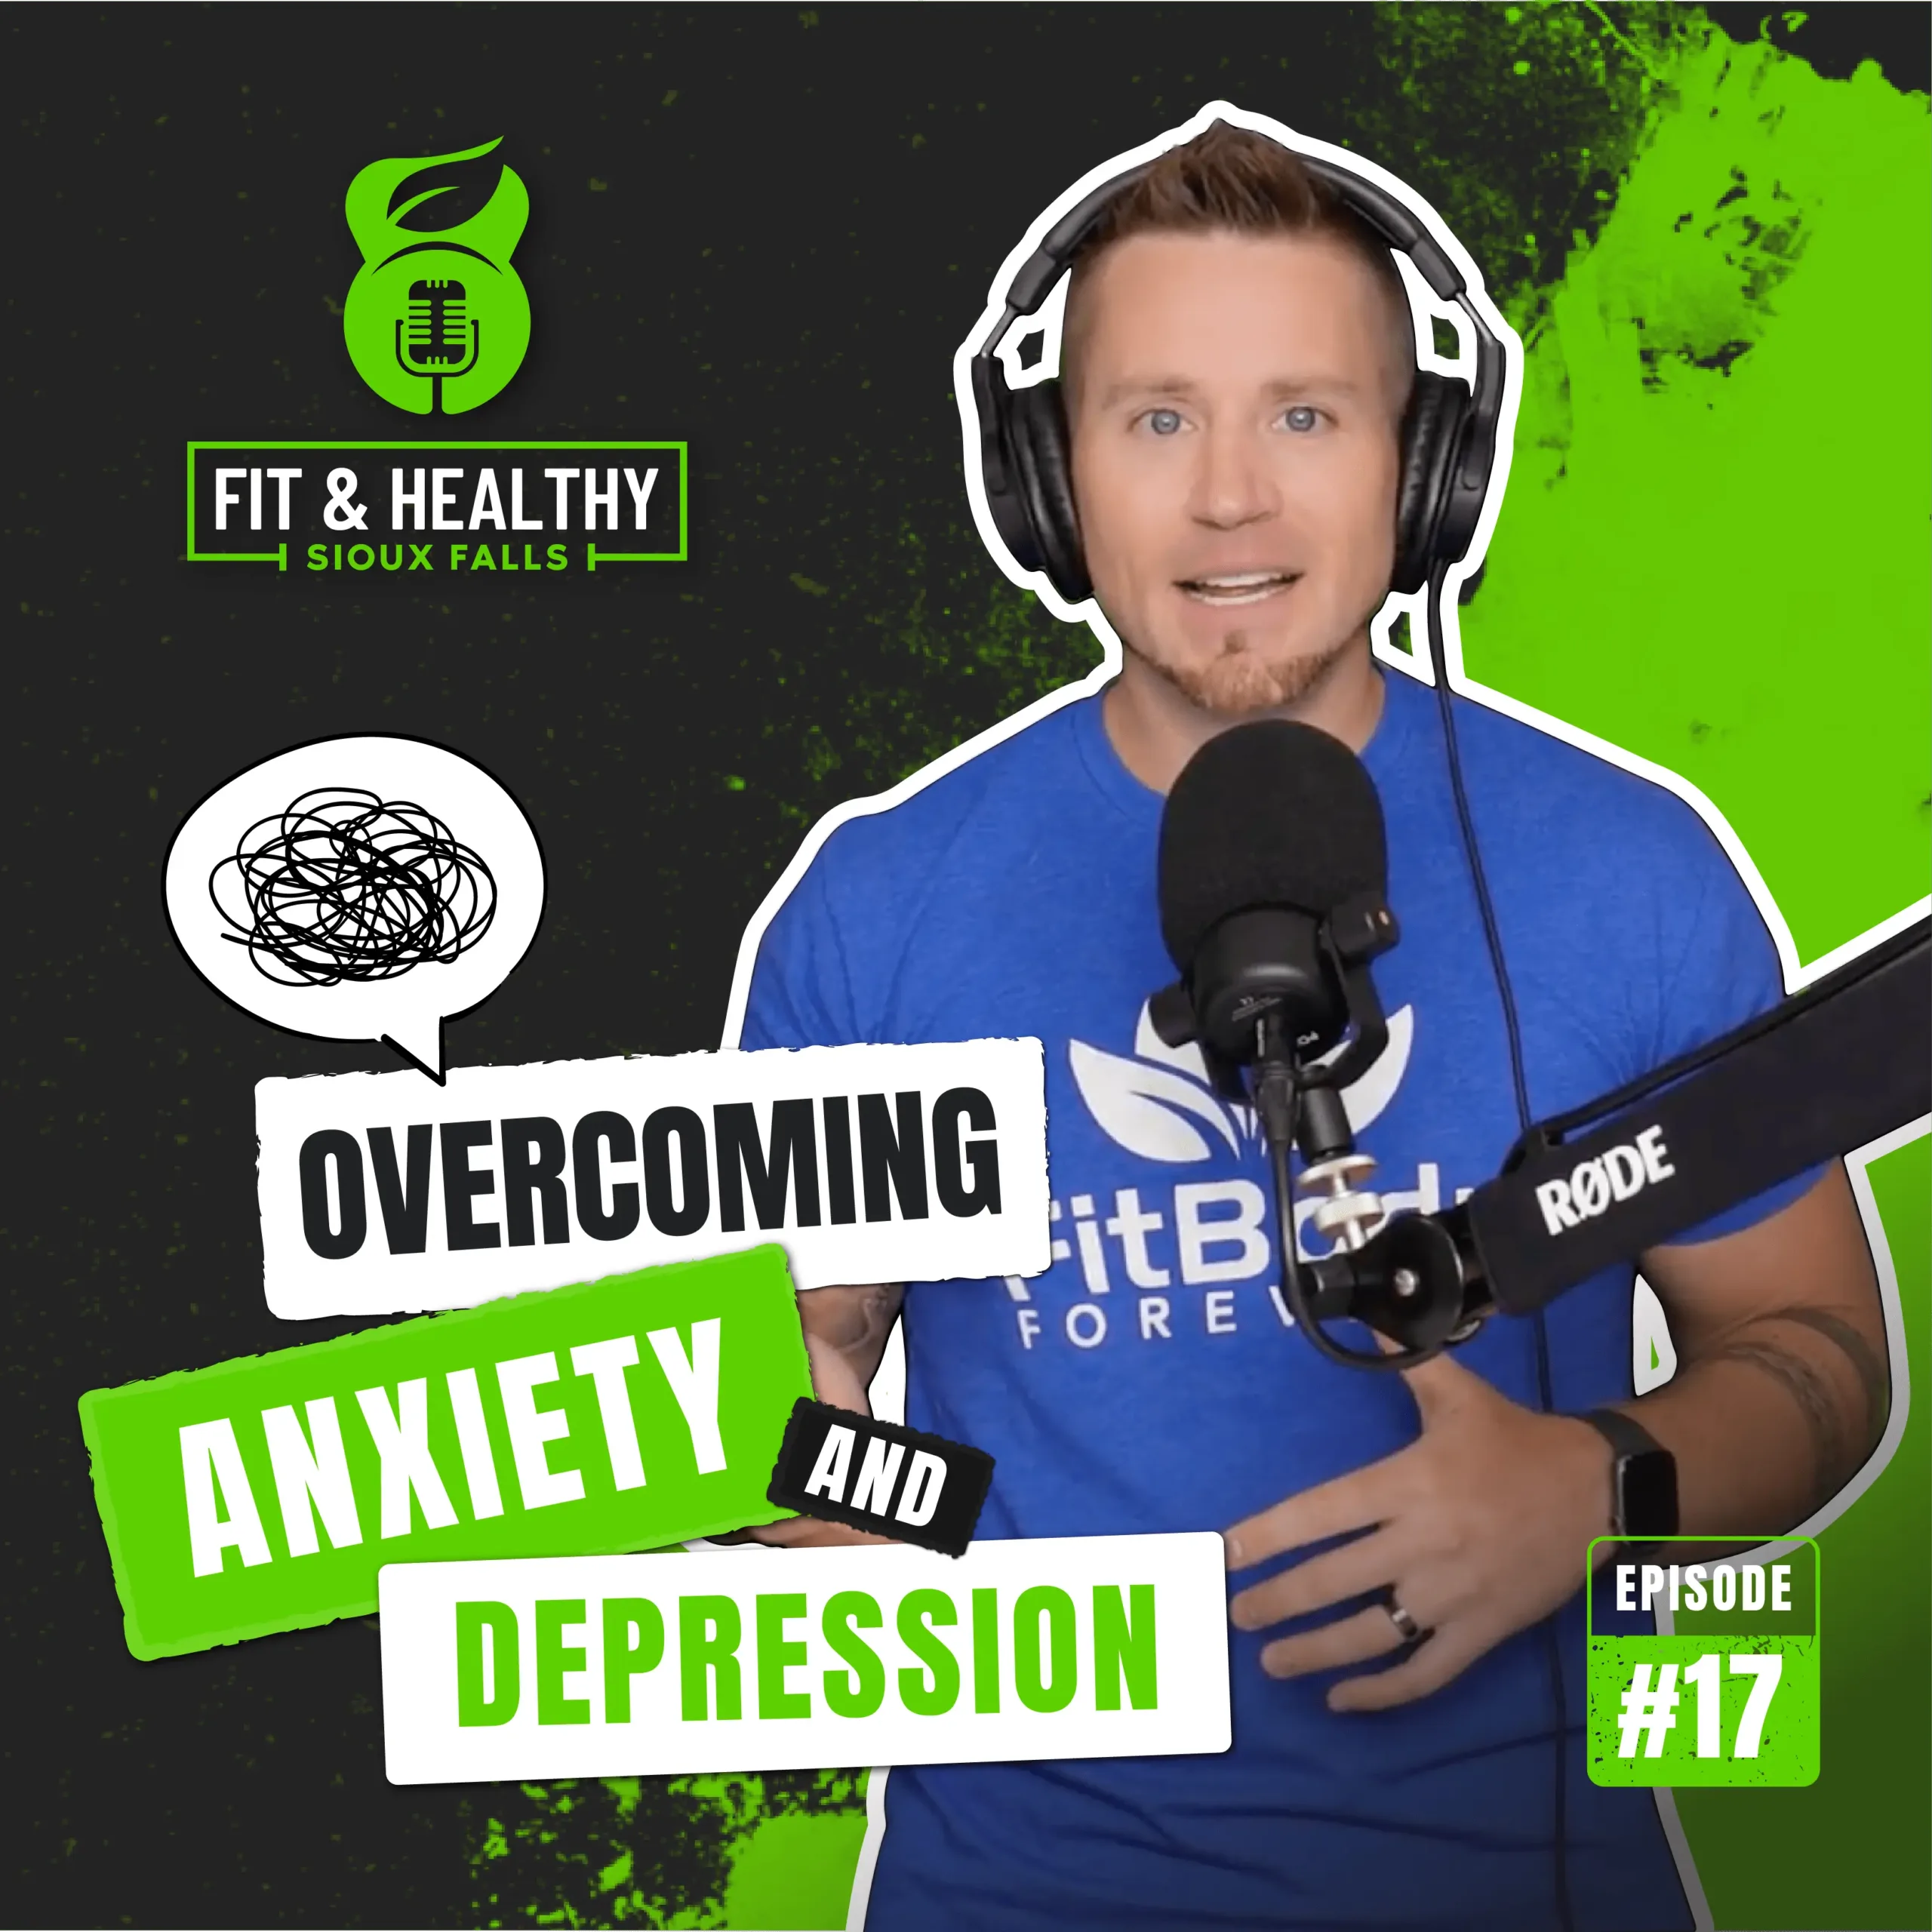 Episode 17 - Overcoming Anxiety and Depression